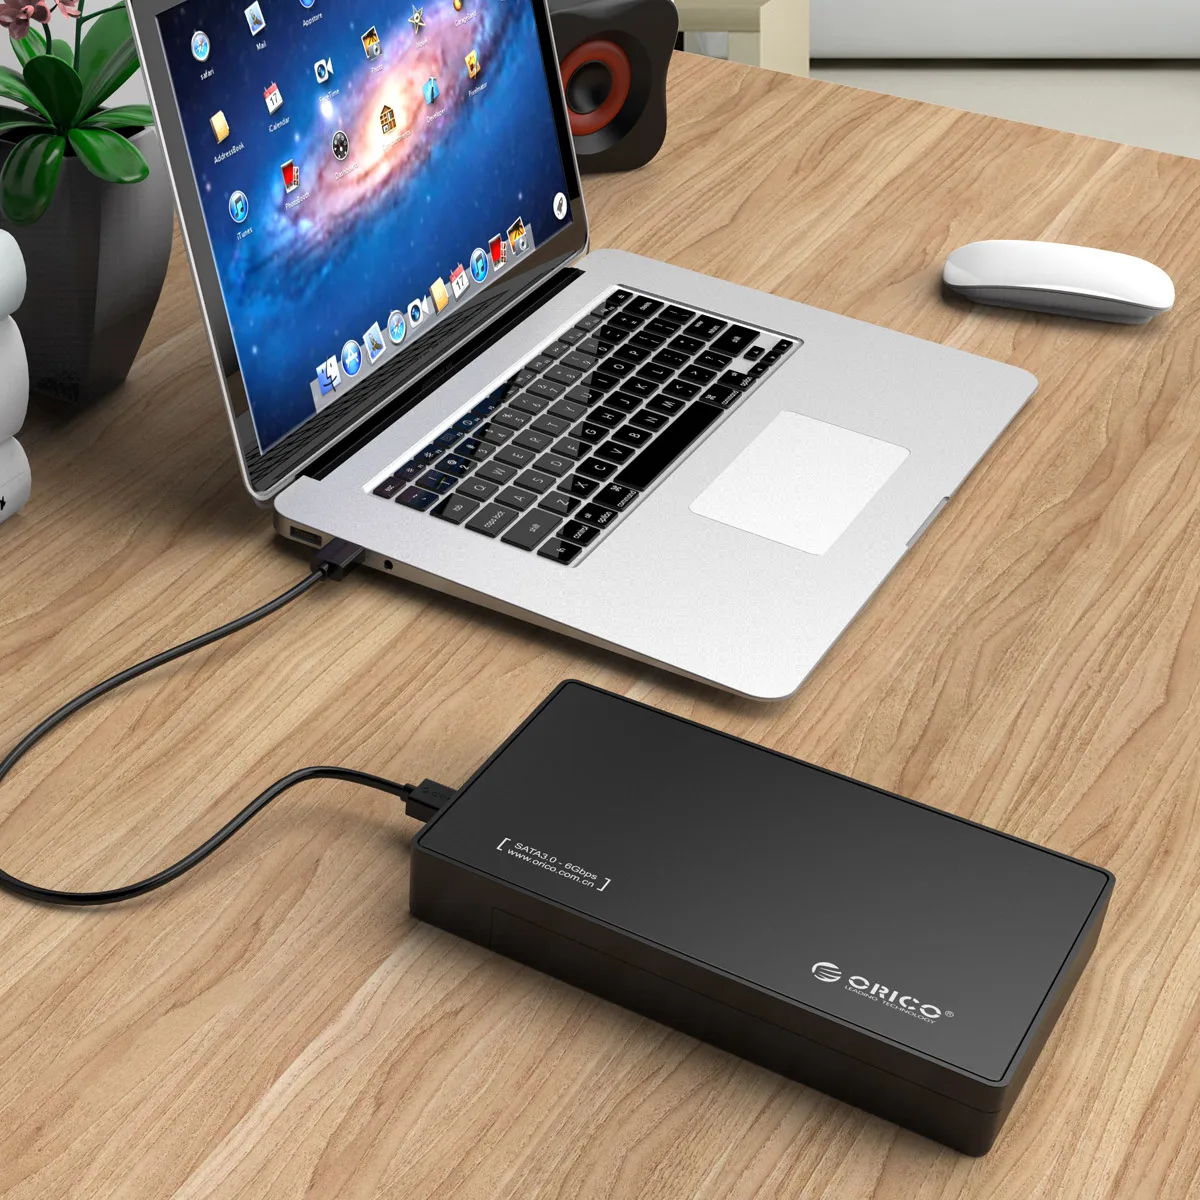 3.5 inch external hard drive enclosure ORICO 3.5'' HDD Case Type C SATA to USB3.0 External Hard Drive Enclosure for 2.5/3.5inch SSD Disk HDD Box Case Support UASP 18TB 3.5 inch hdd enclosure HDD Box Enclosures